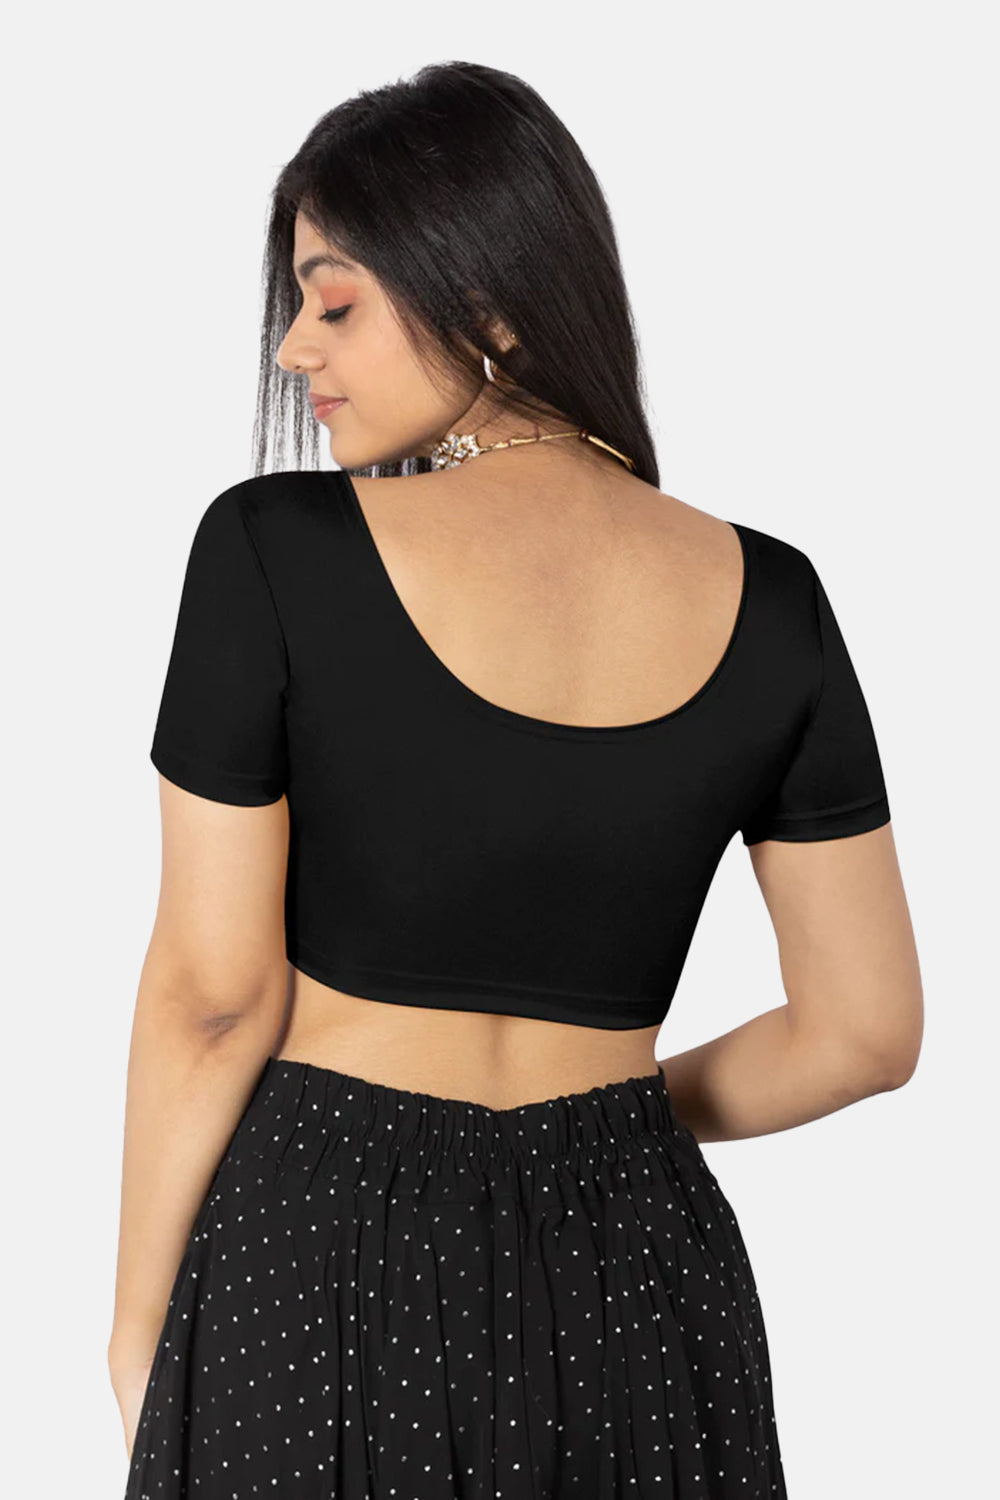 Naidu Hall Knitted Blouse With Round Neck Princess Cut Short Sleeve - Black Shimmer